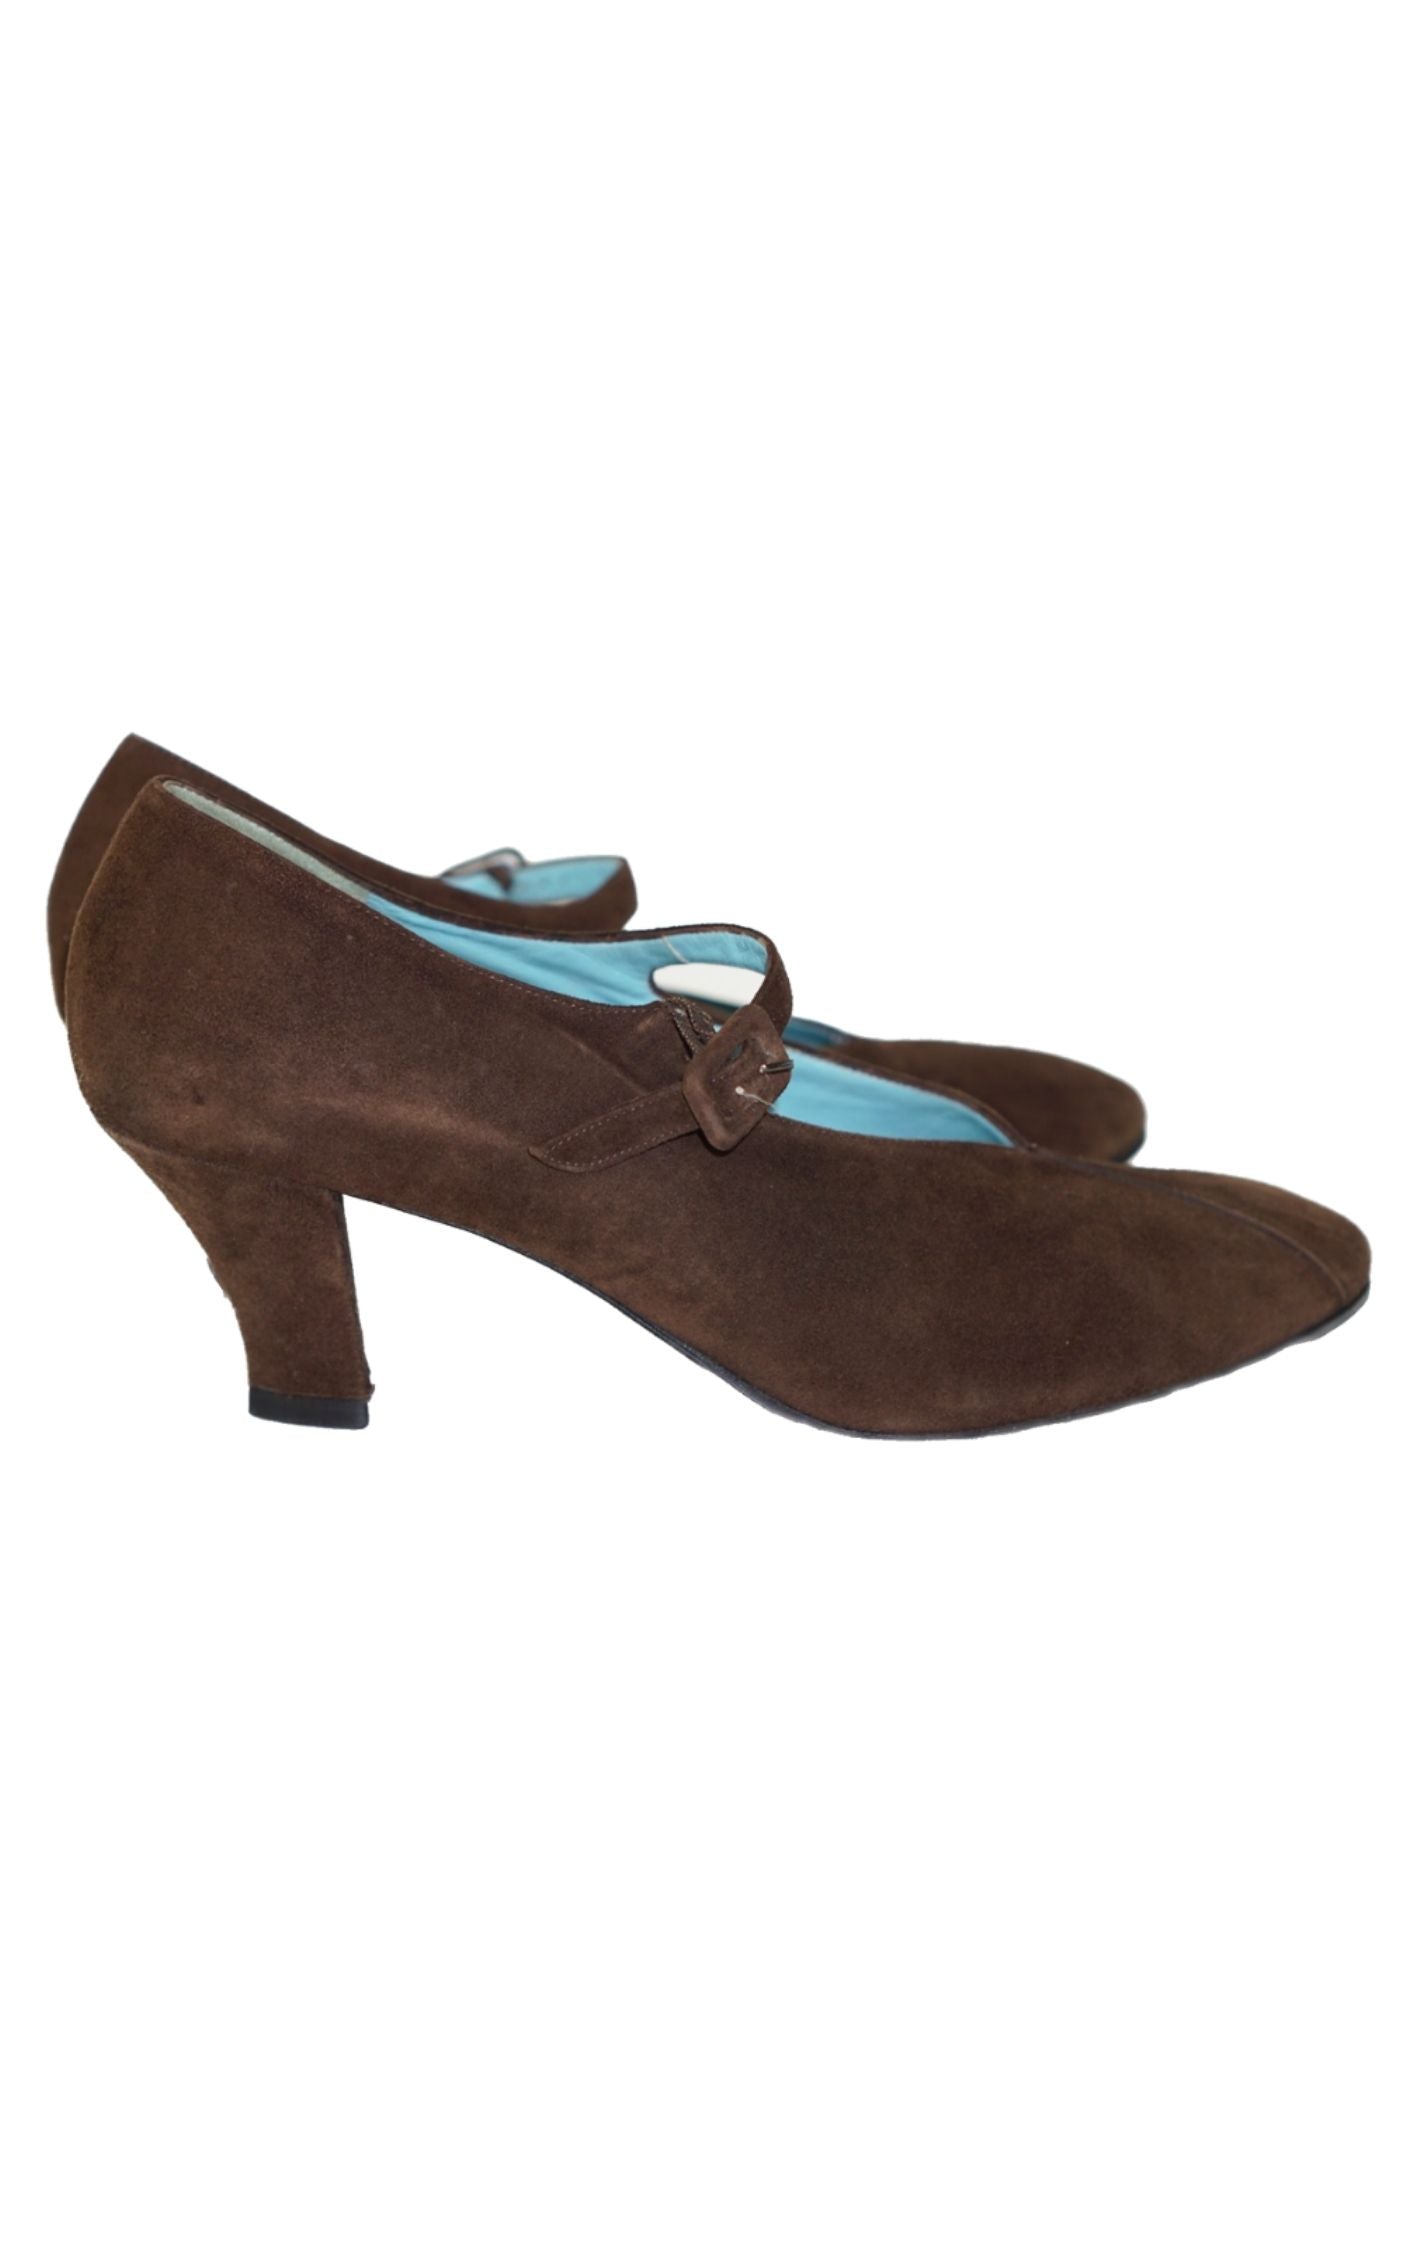 THIERRY RABOTIN Vintage Brown Suede Mary Jane Pumps